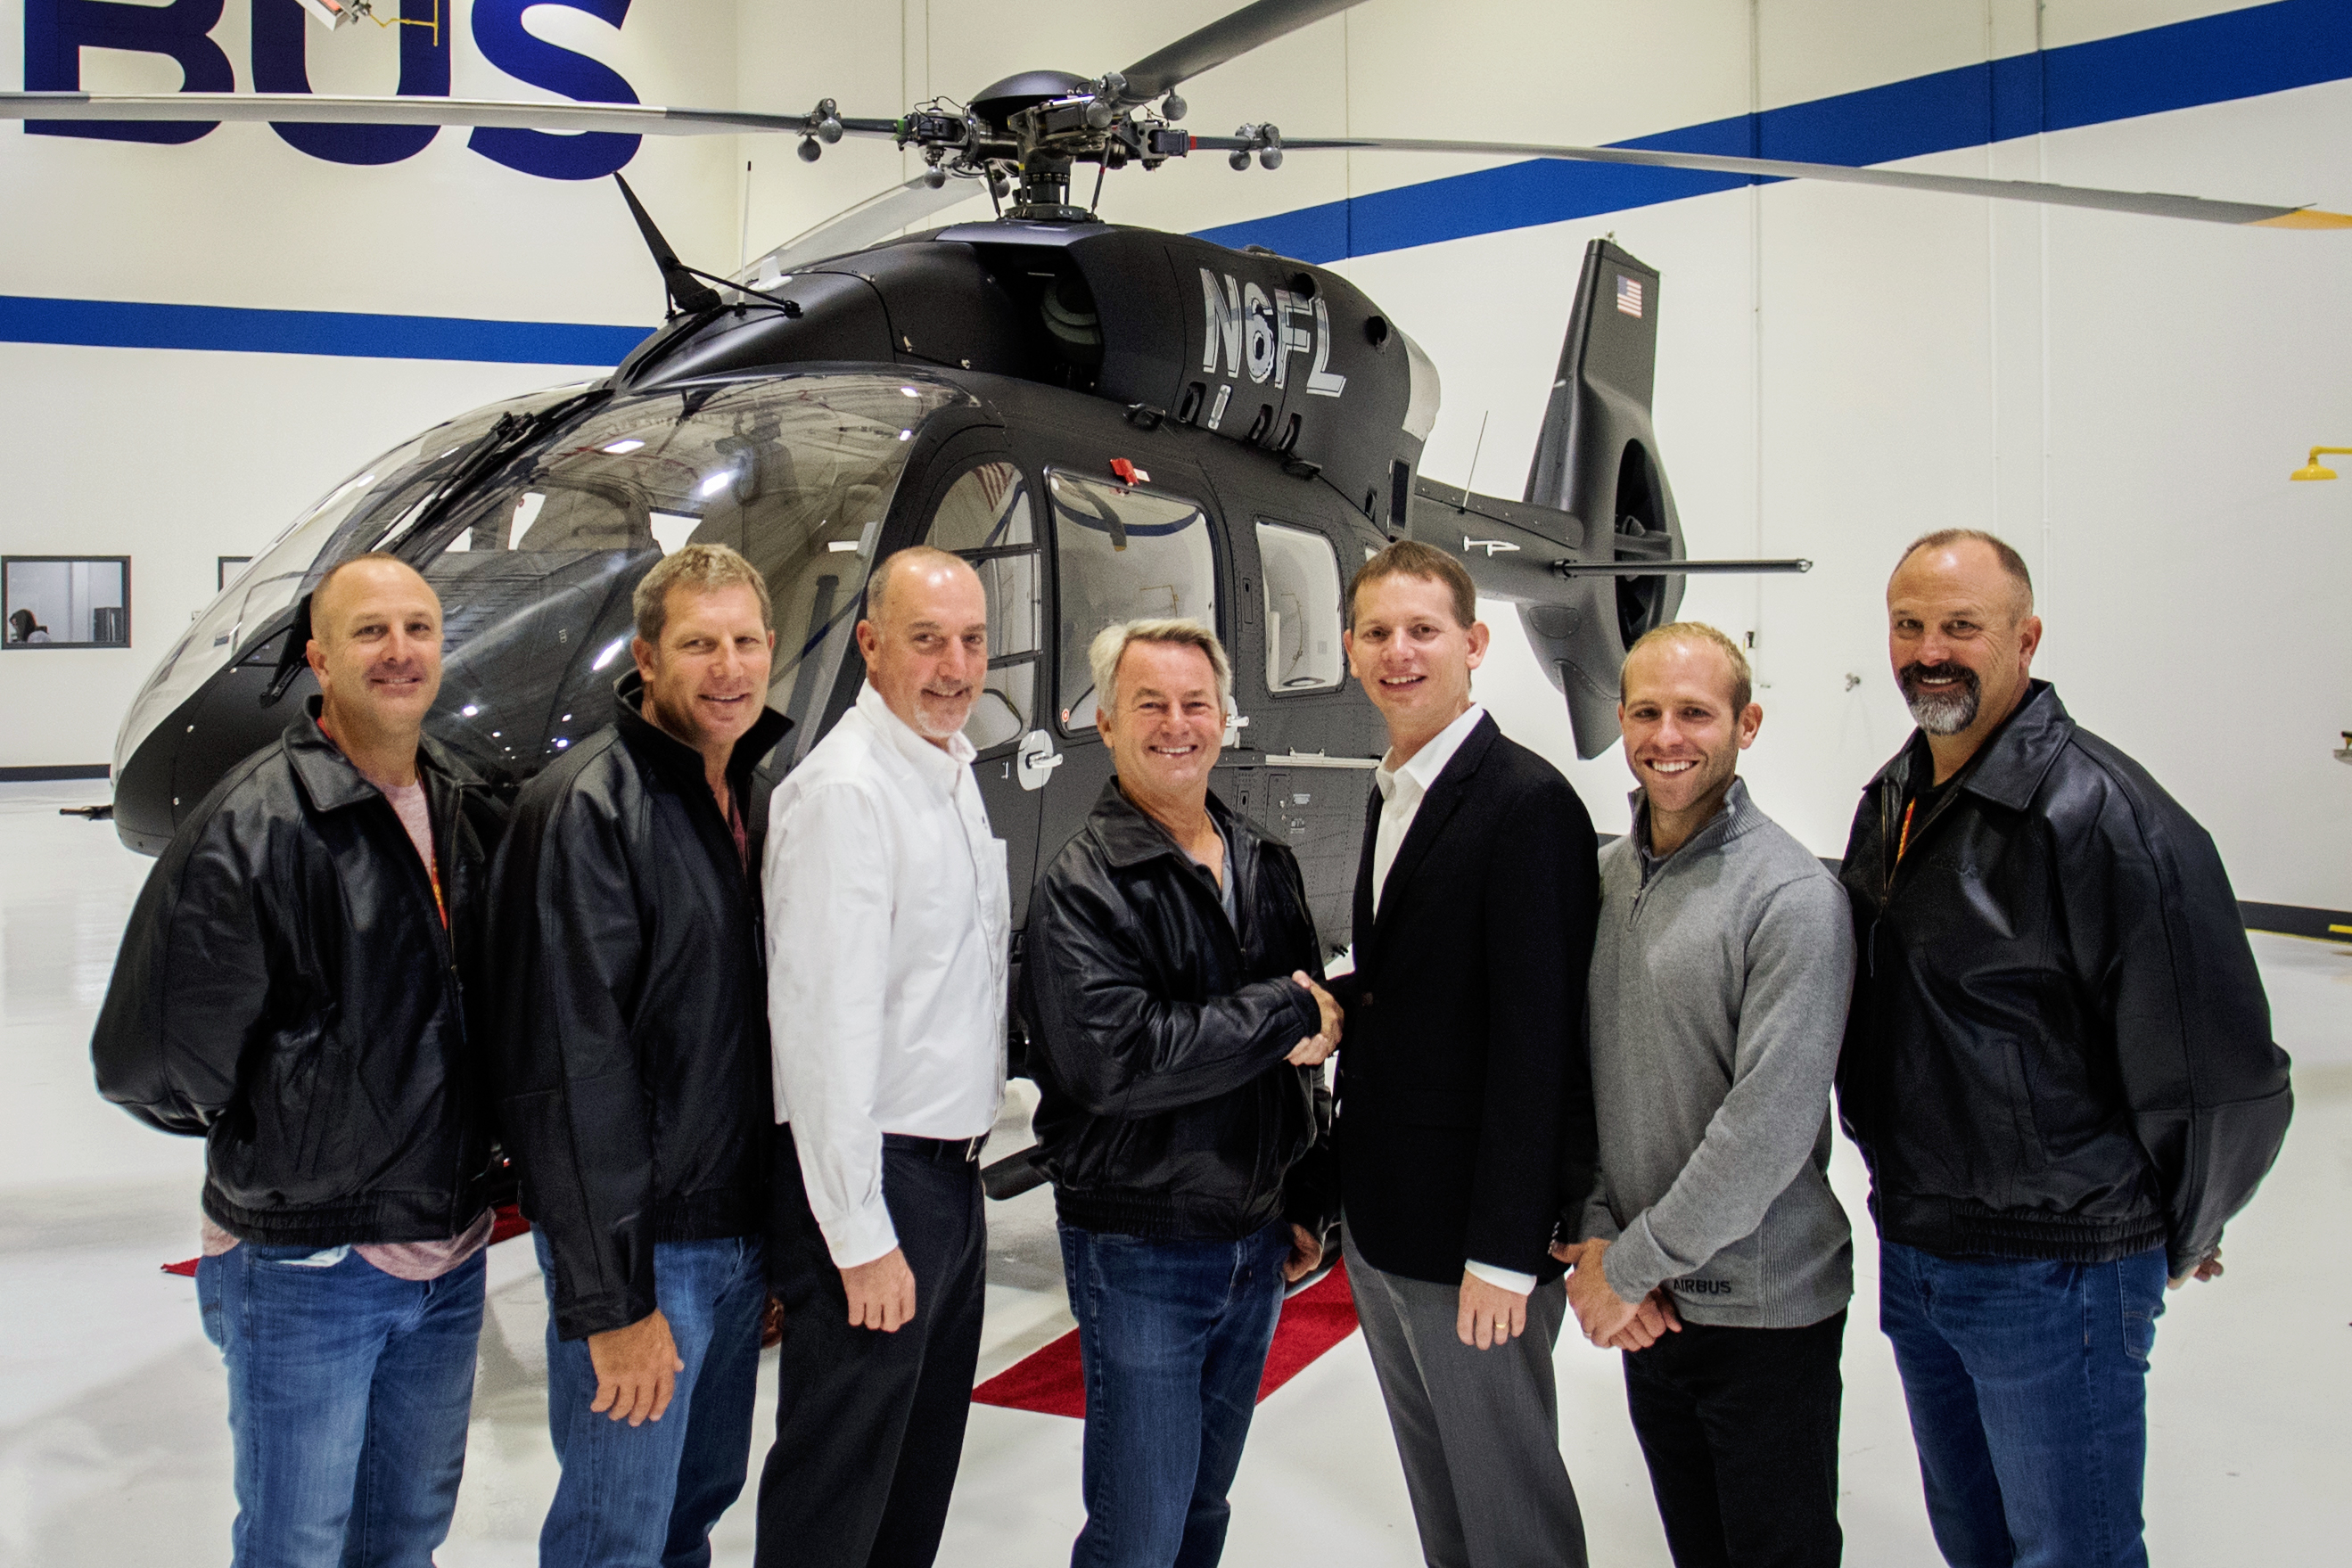 From left: Mark Hulsey; Jon Corn; Michael O’Connor, Airbus Helicopters, Inc.; Fred Luddy, founder of Service Now and SoCal Air Services; Romain Trapp, Airbus Helicopters, Inc. COO; Travis Tinsey, Airbus Helicopters, Inc.; Mike Hulsey. Airbus Photo